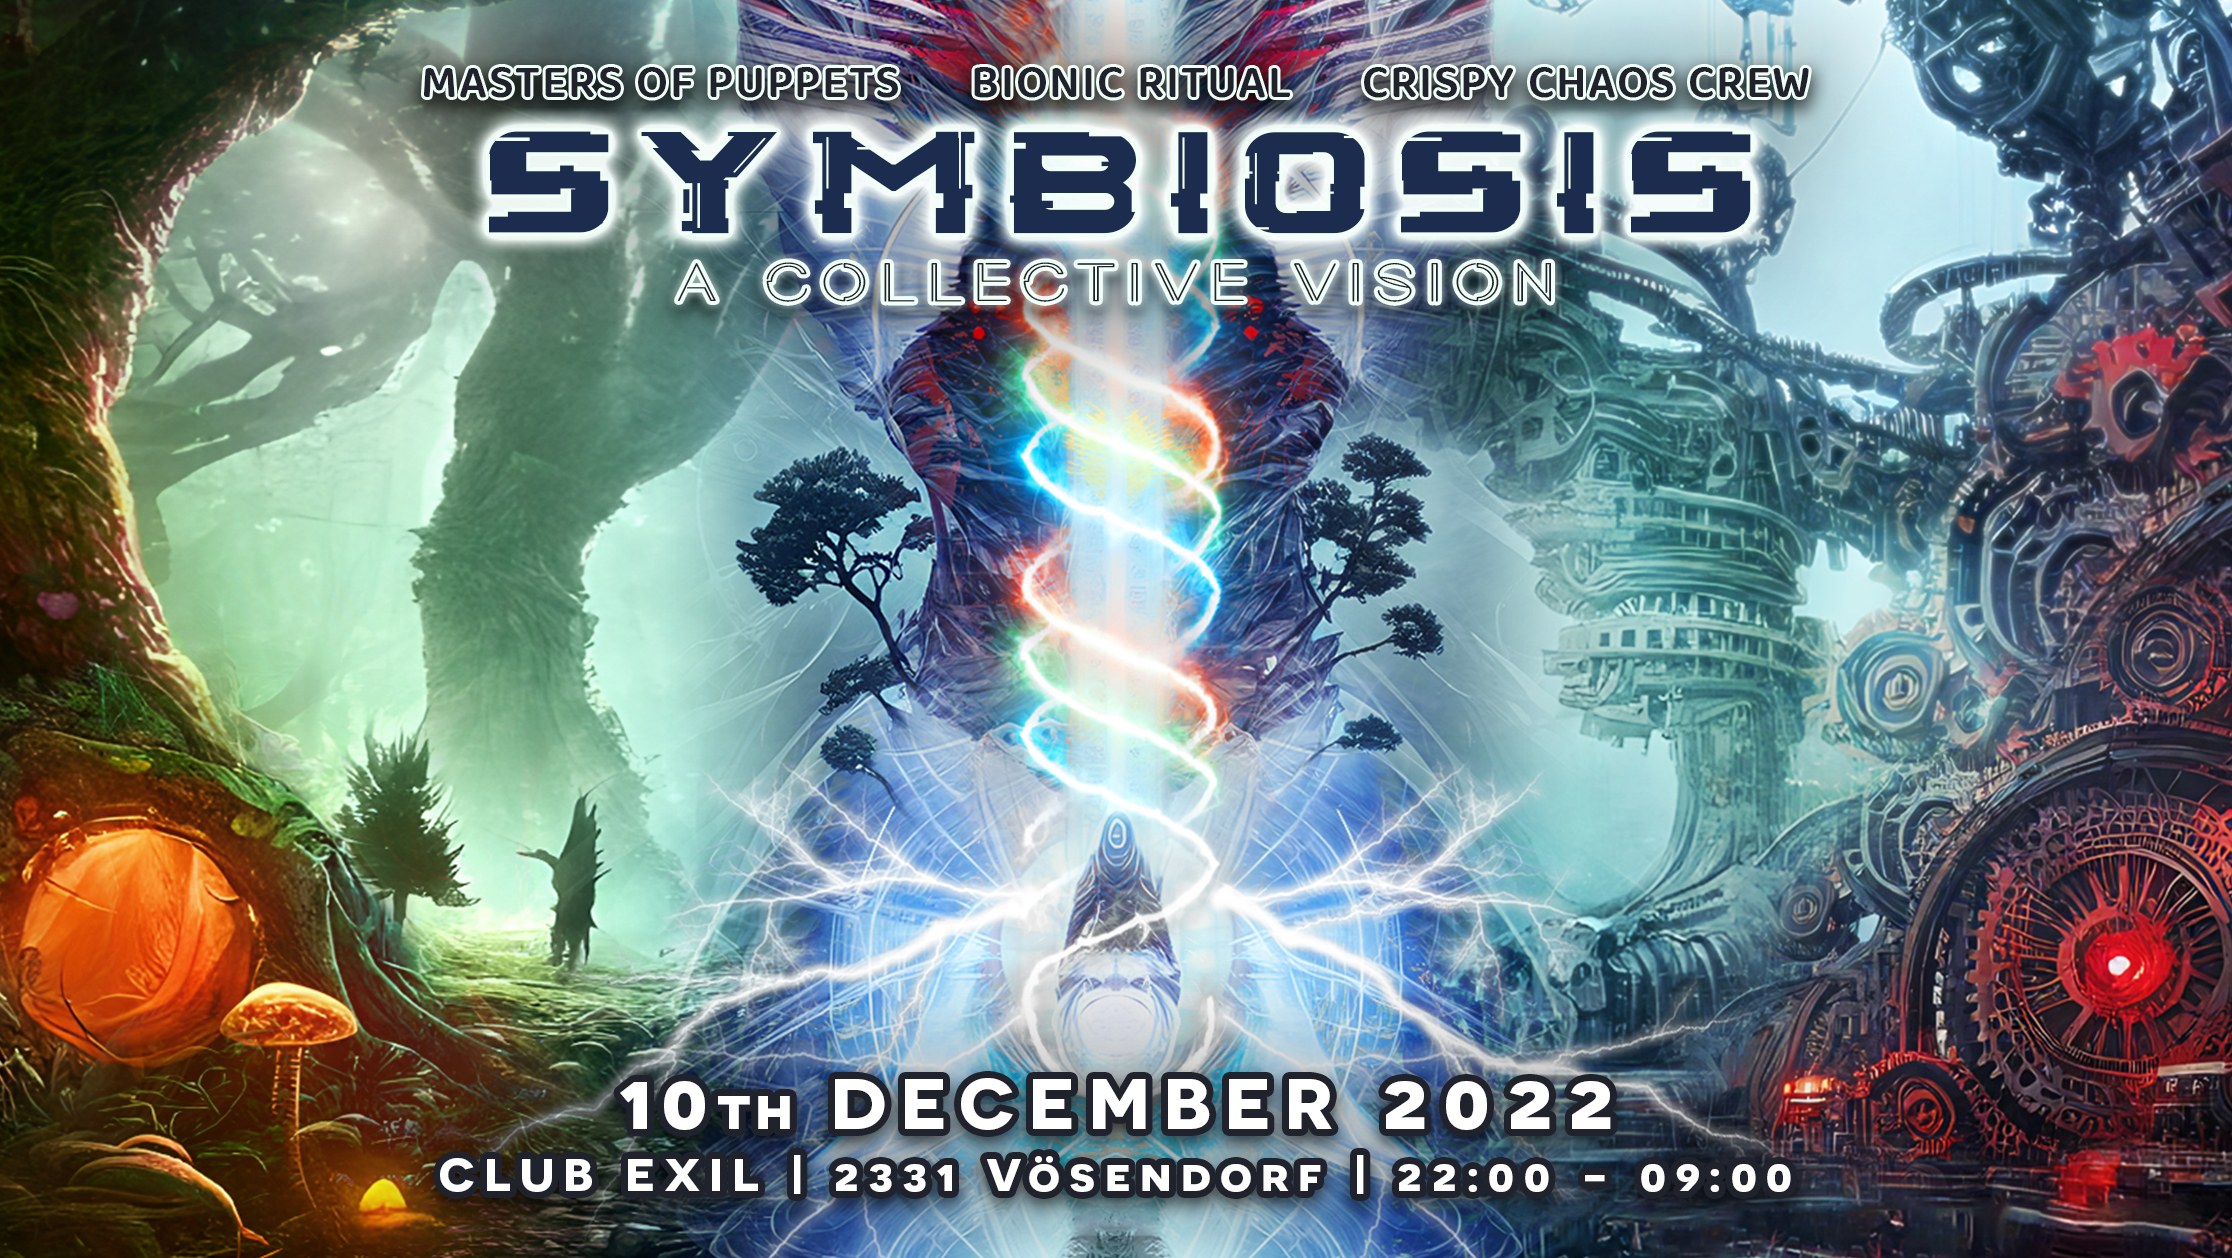 Symbiosis - A Collective Vision by Masters of Puppets, Bionic Ritual, Crispy Chaos Crew am 10. December 2022 @ EXIL.